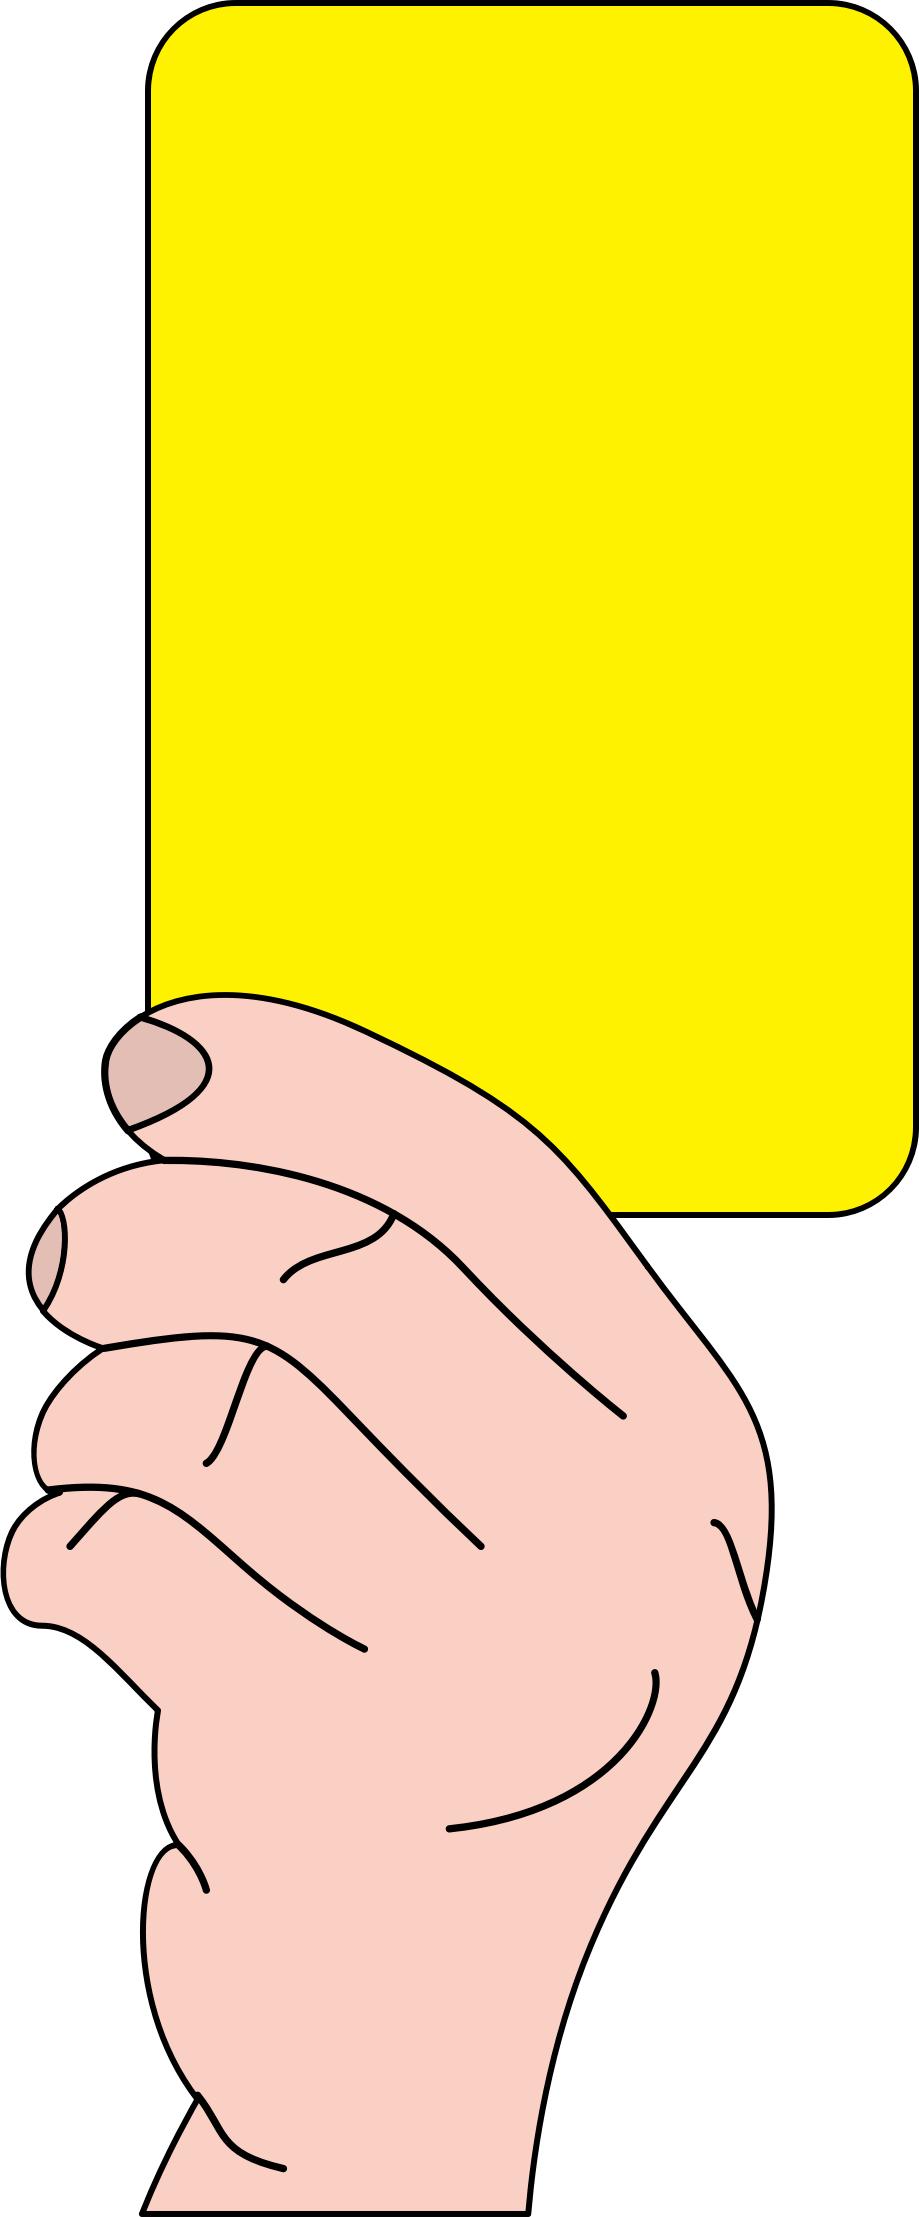 Referee showing yellow card png